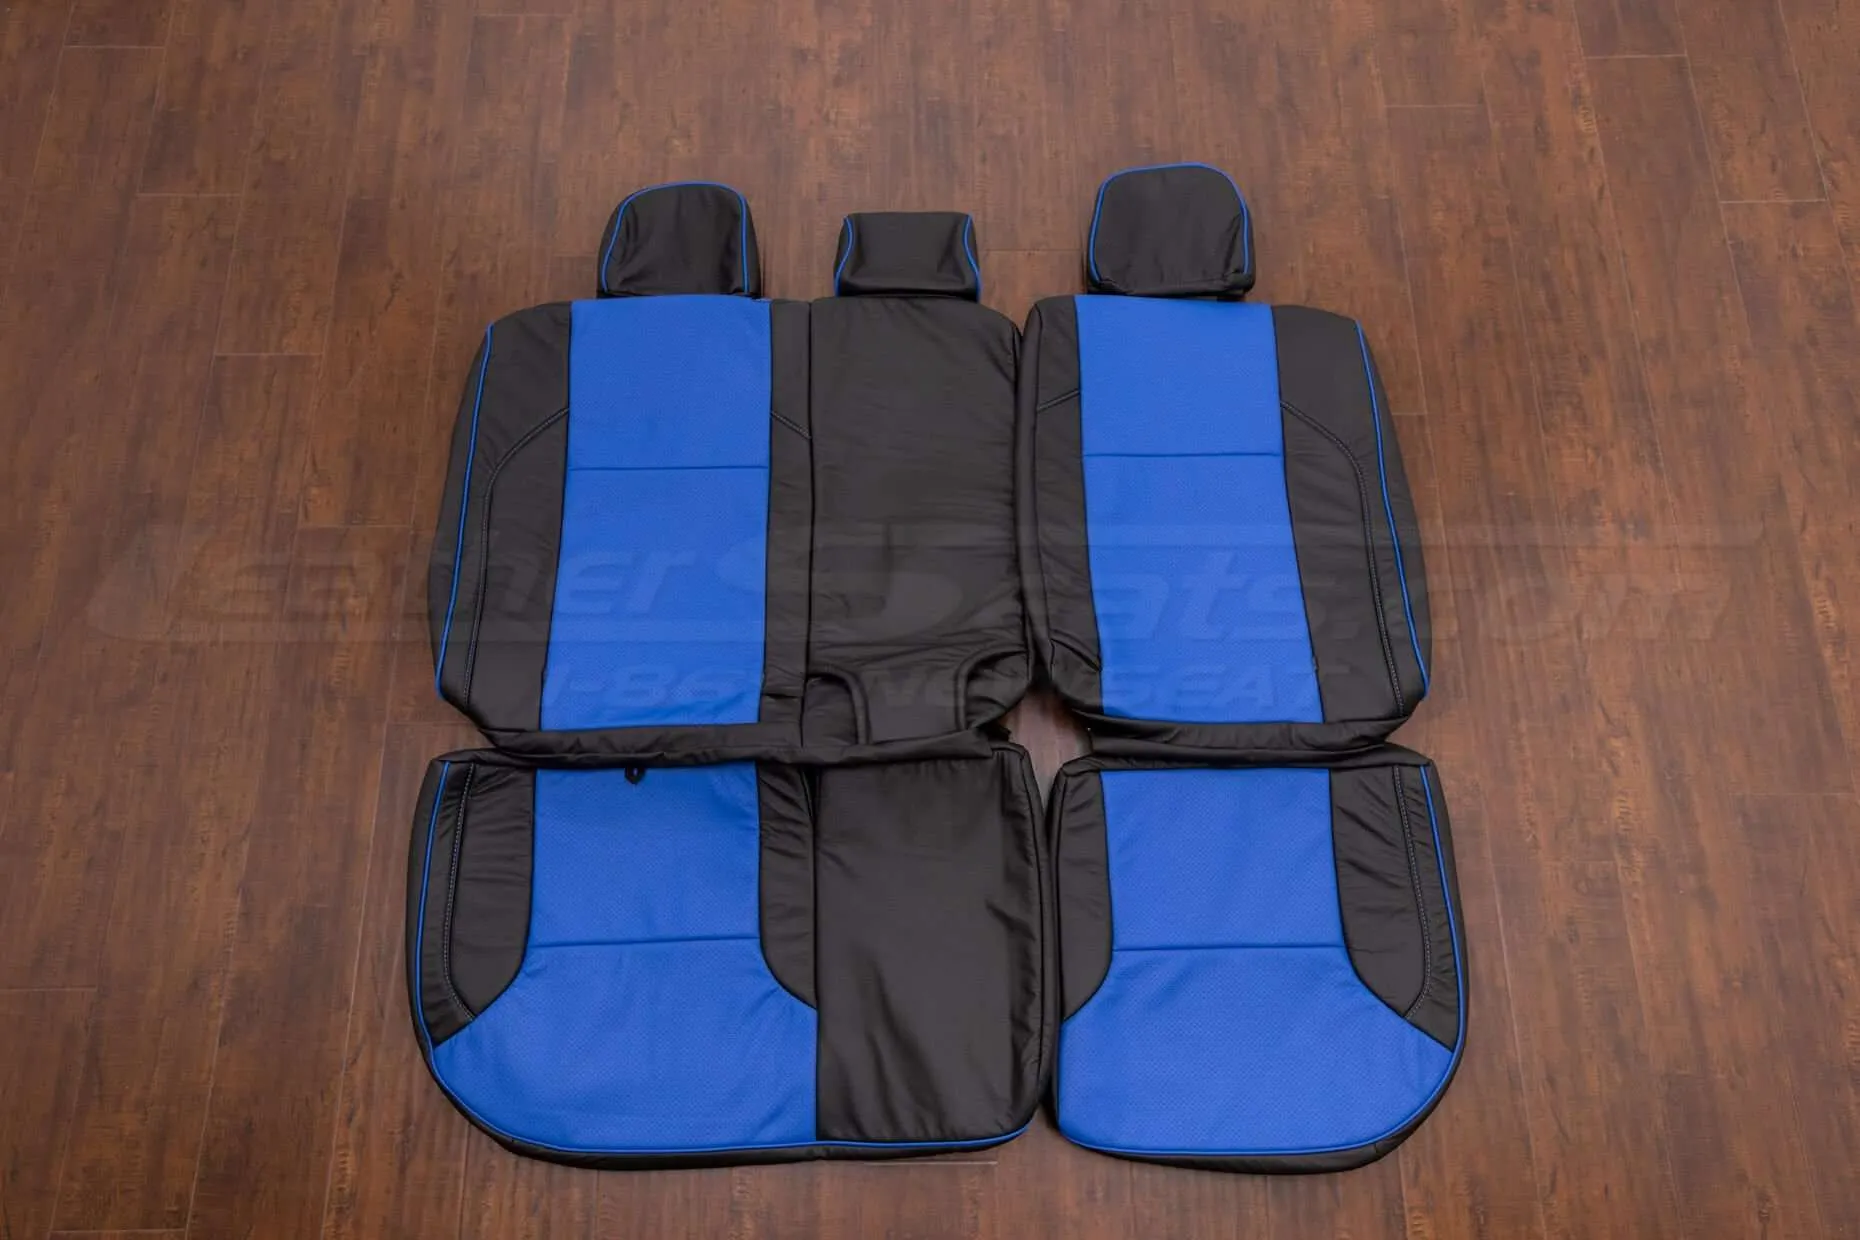 Toyota Tacoma Double Cab Leather Seat Kit - Black & Cobalt - Rear sear upholstery